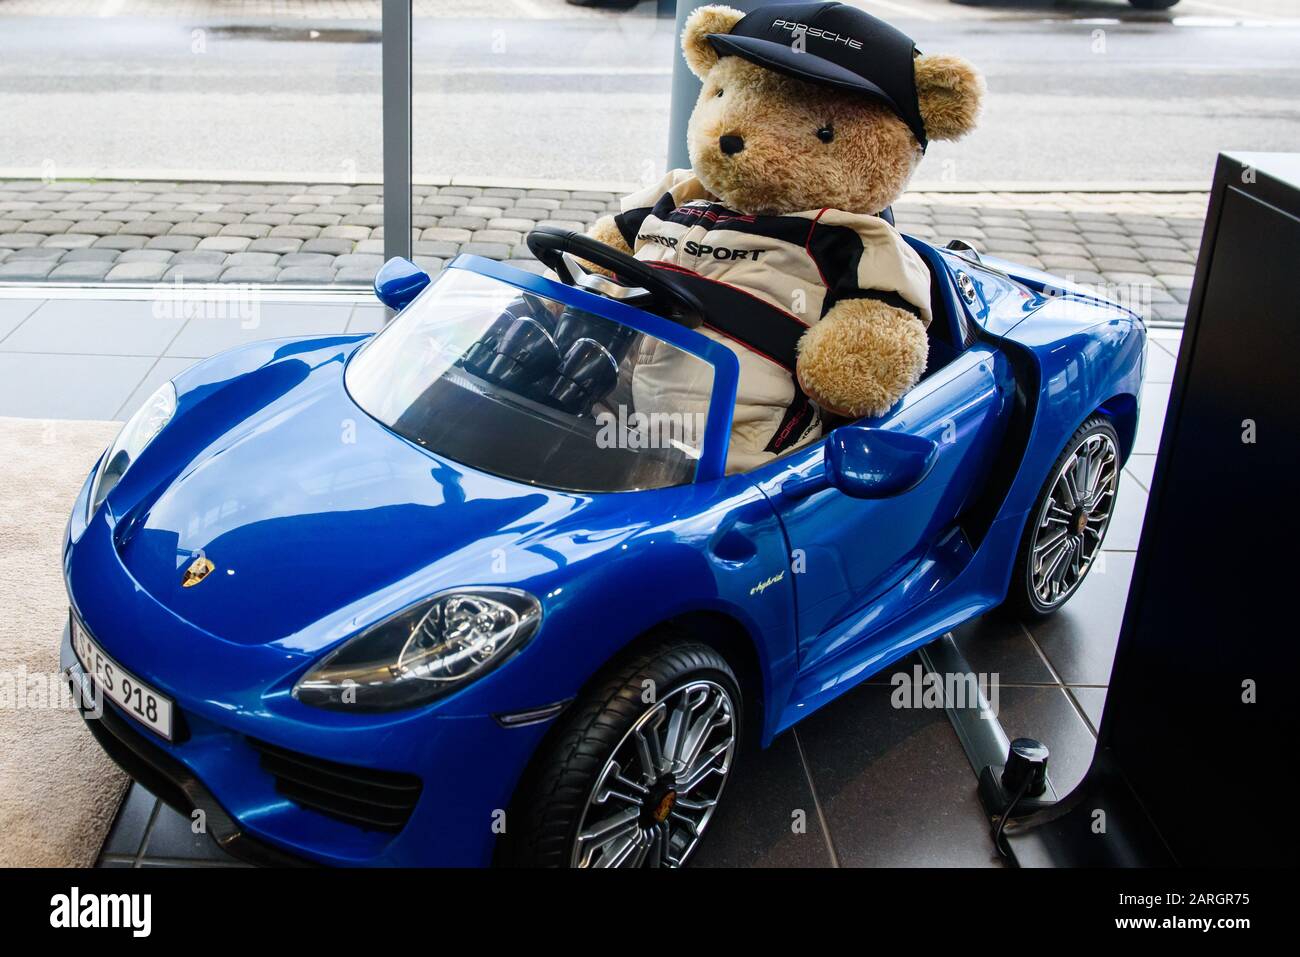 RIGA, LATVIA. 22nd January 2020. Teddy bear toy at Porsche toy car. Porsche is a German automobile manufacturer specializing in high-performance sports cars, SUVs and sedans. Stock Photo